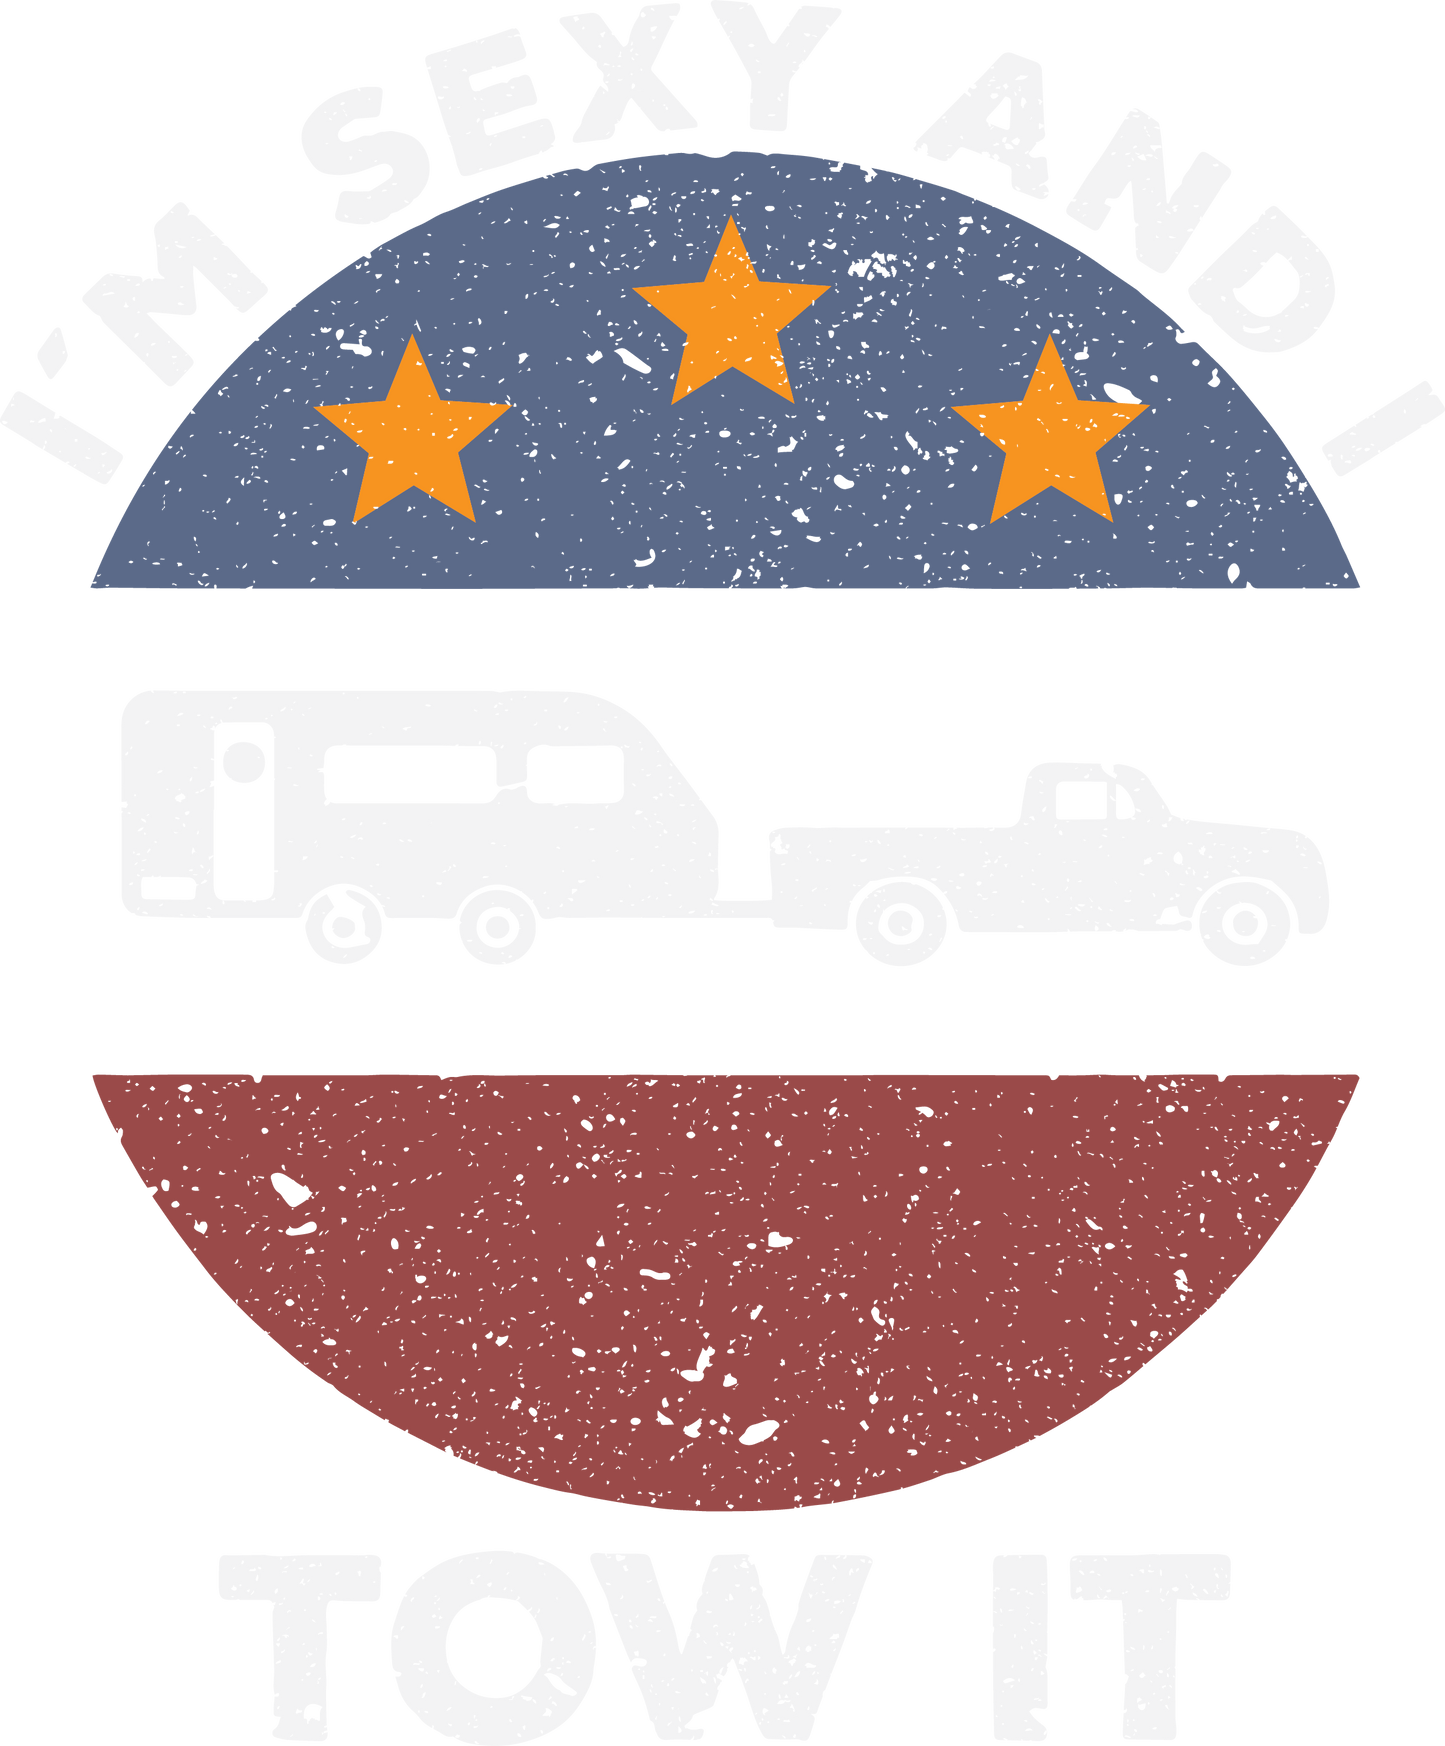 I'm Sexy and I Tow It Design Transfer